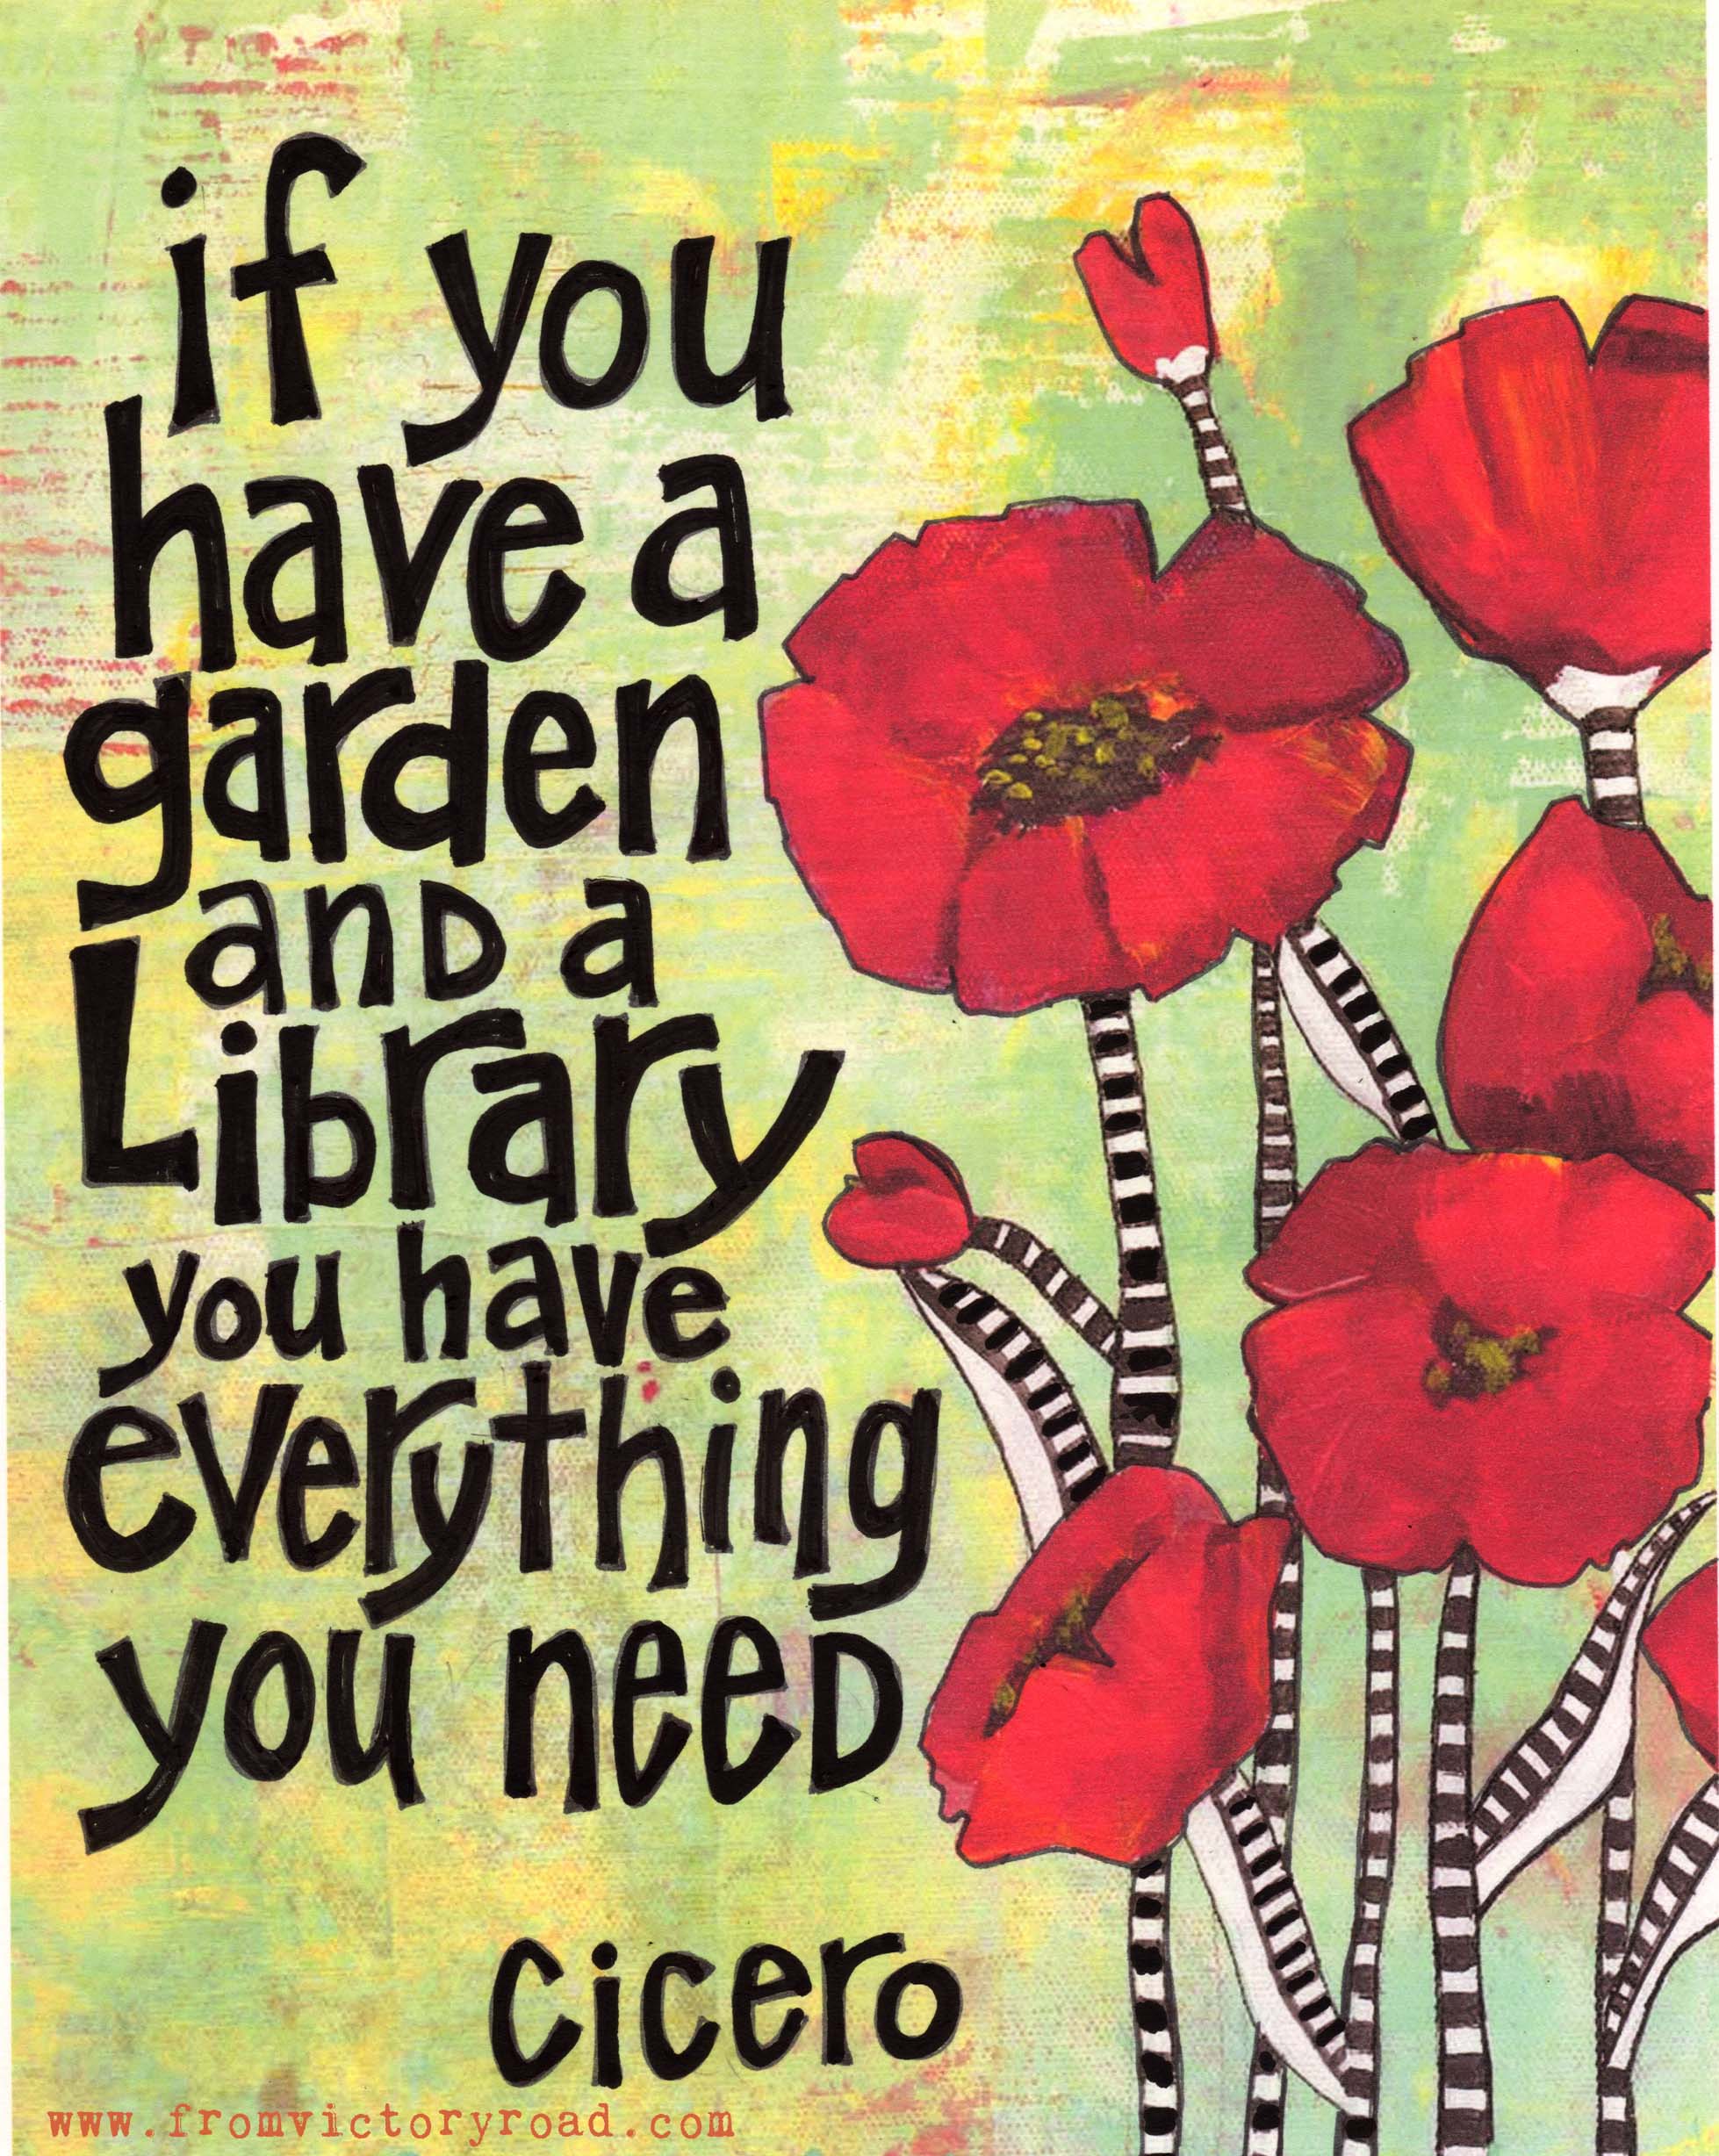 If You Have A Garden And A Library From Victory Road